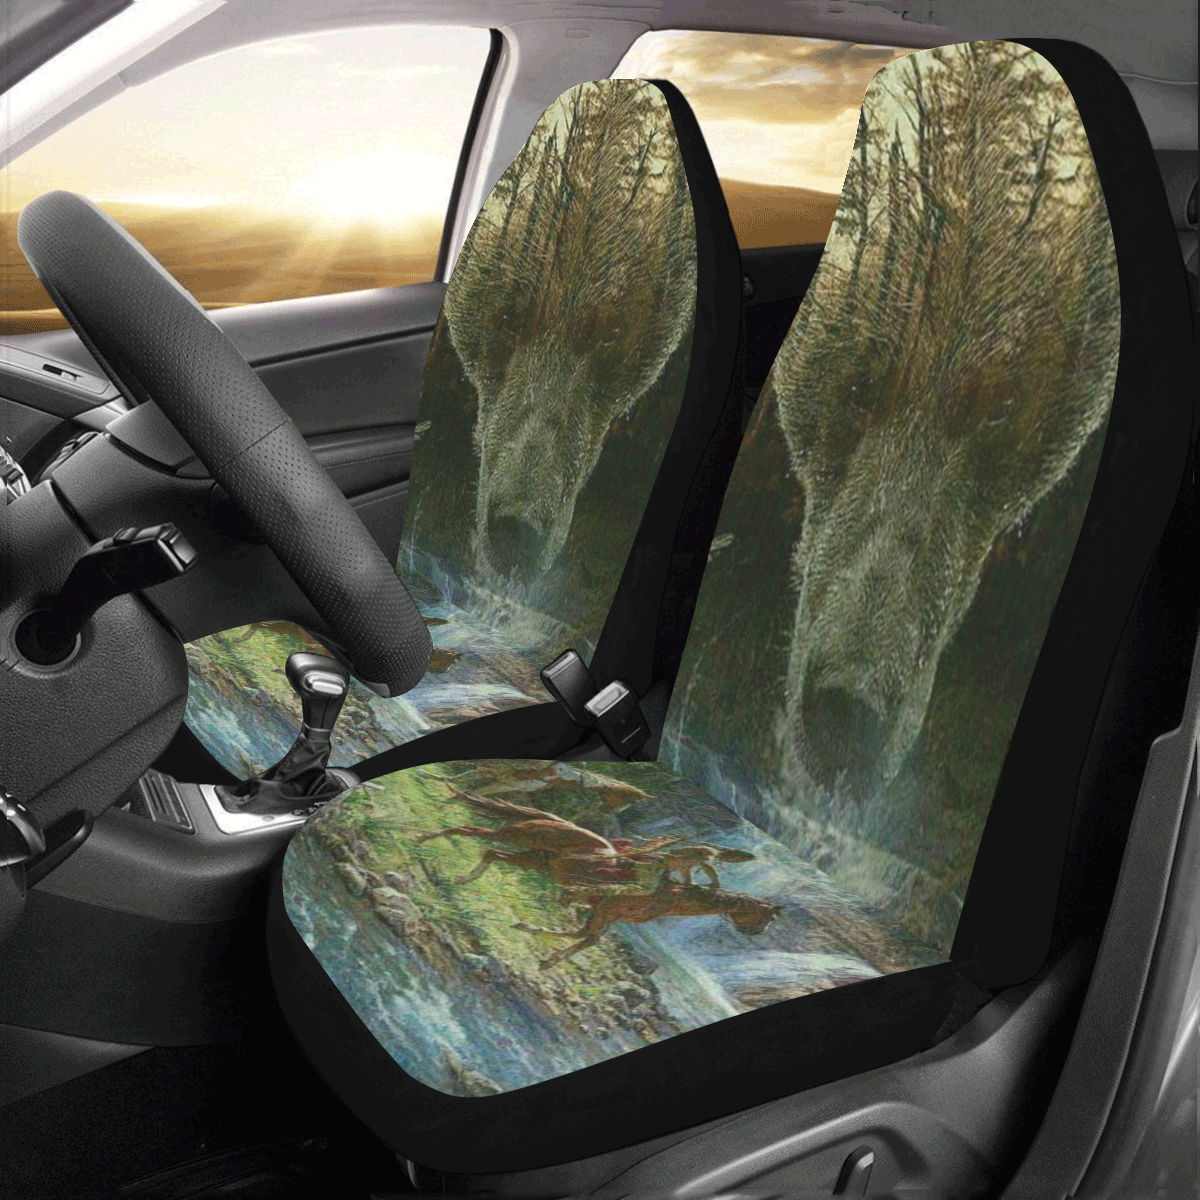 Spirit Of The Grizzly Bear Car Seat Covers (Set of 2)